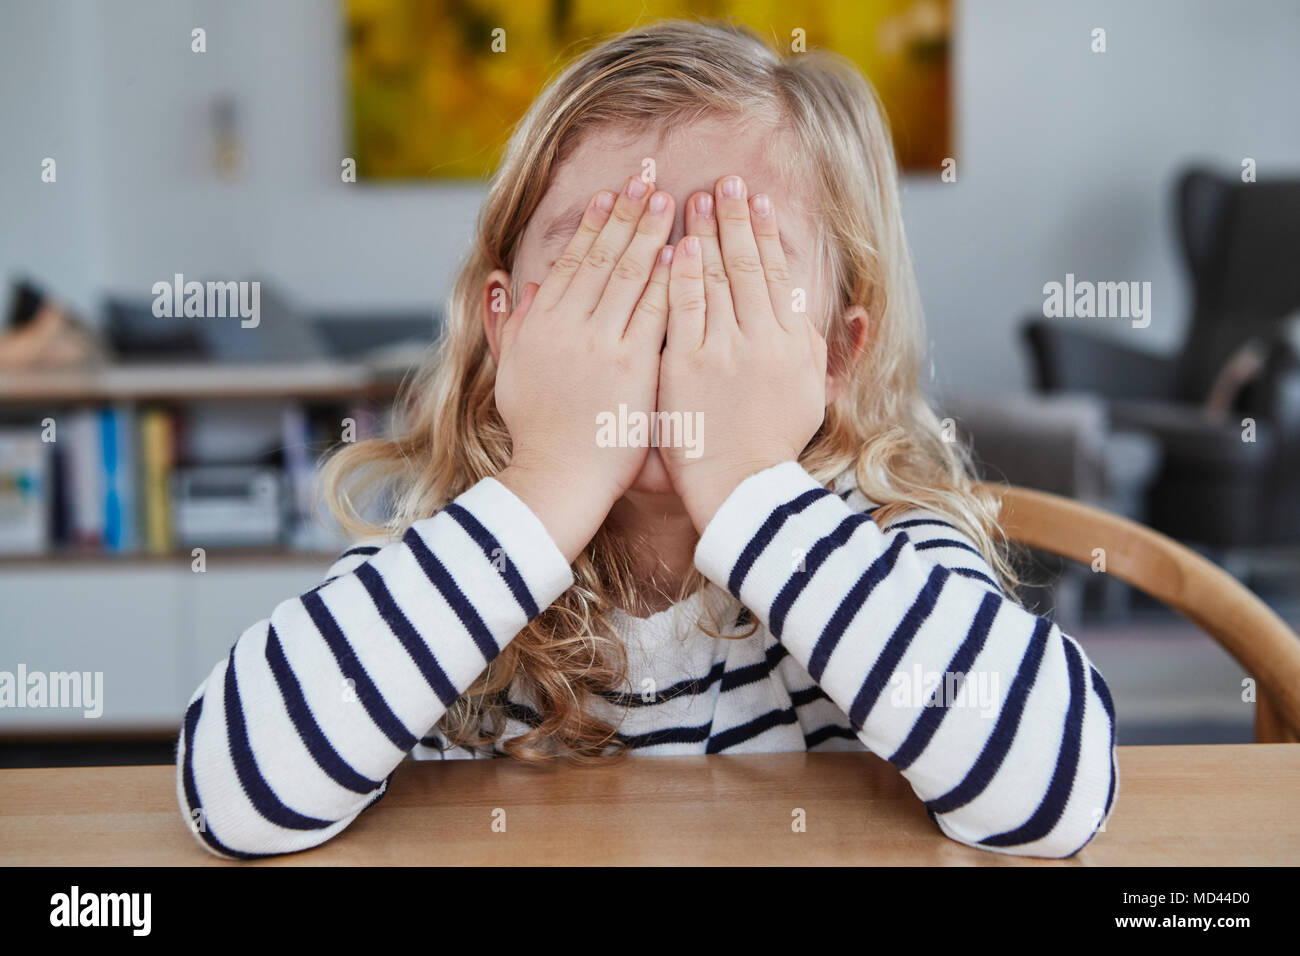 Portrait of young girl, sitting at table, covering face with hands Stock Photo